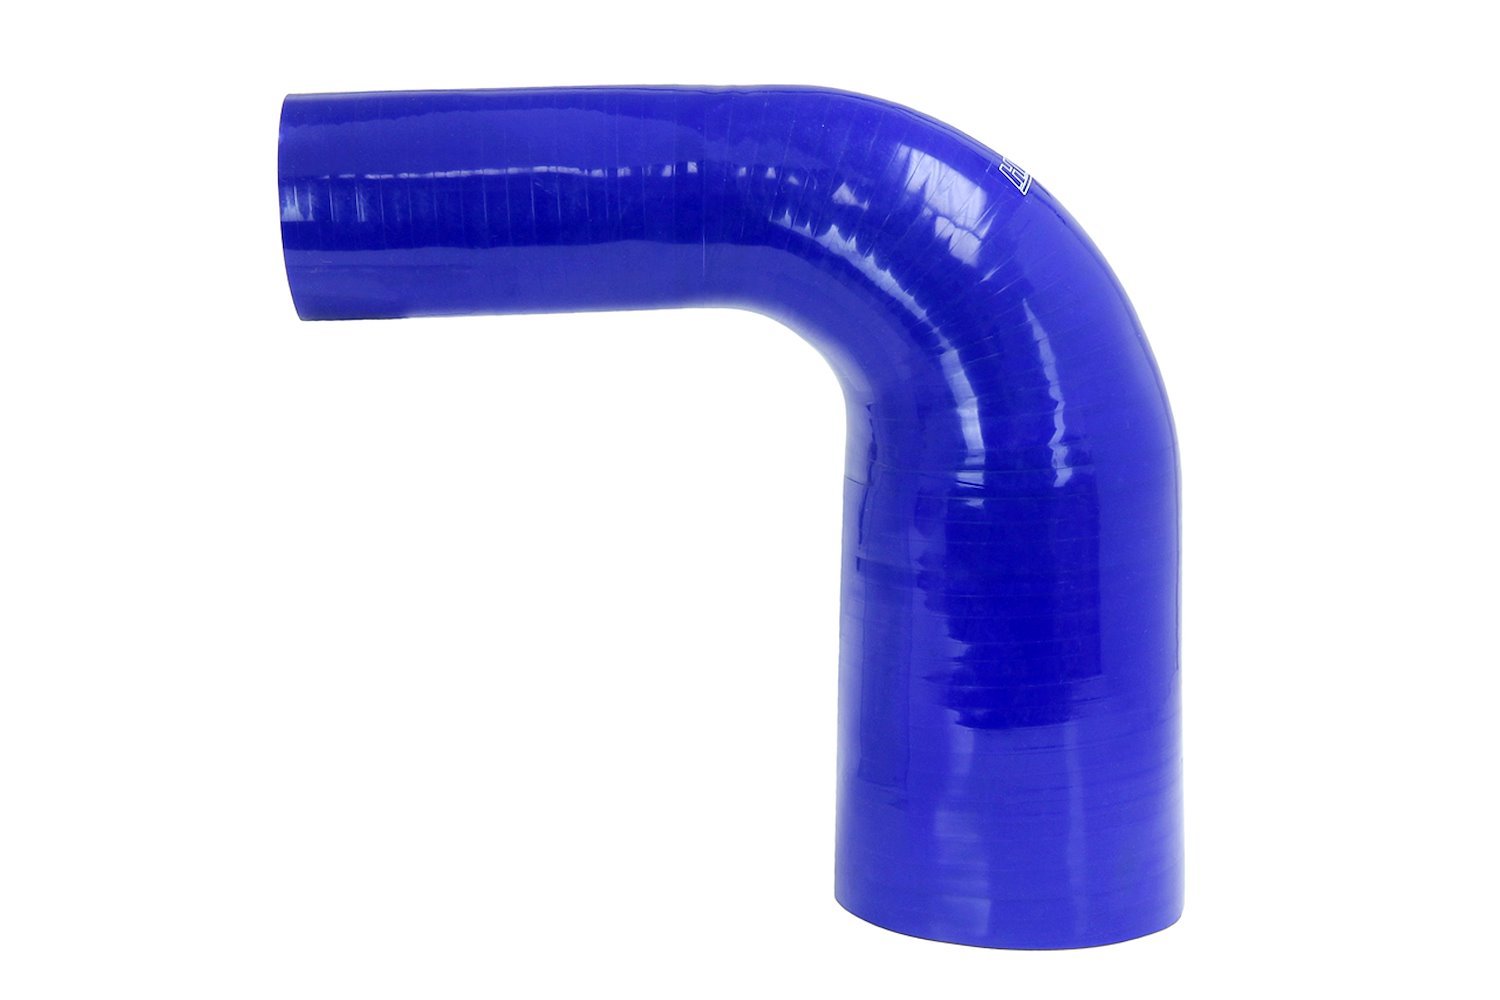 HTSER90-250-275-BLUE Silicone 90-Degree Elbow Hose, High-Temp 4-Ply Reinforced, 2-1/2 in. - 2-3/4 in. ID, Blue